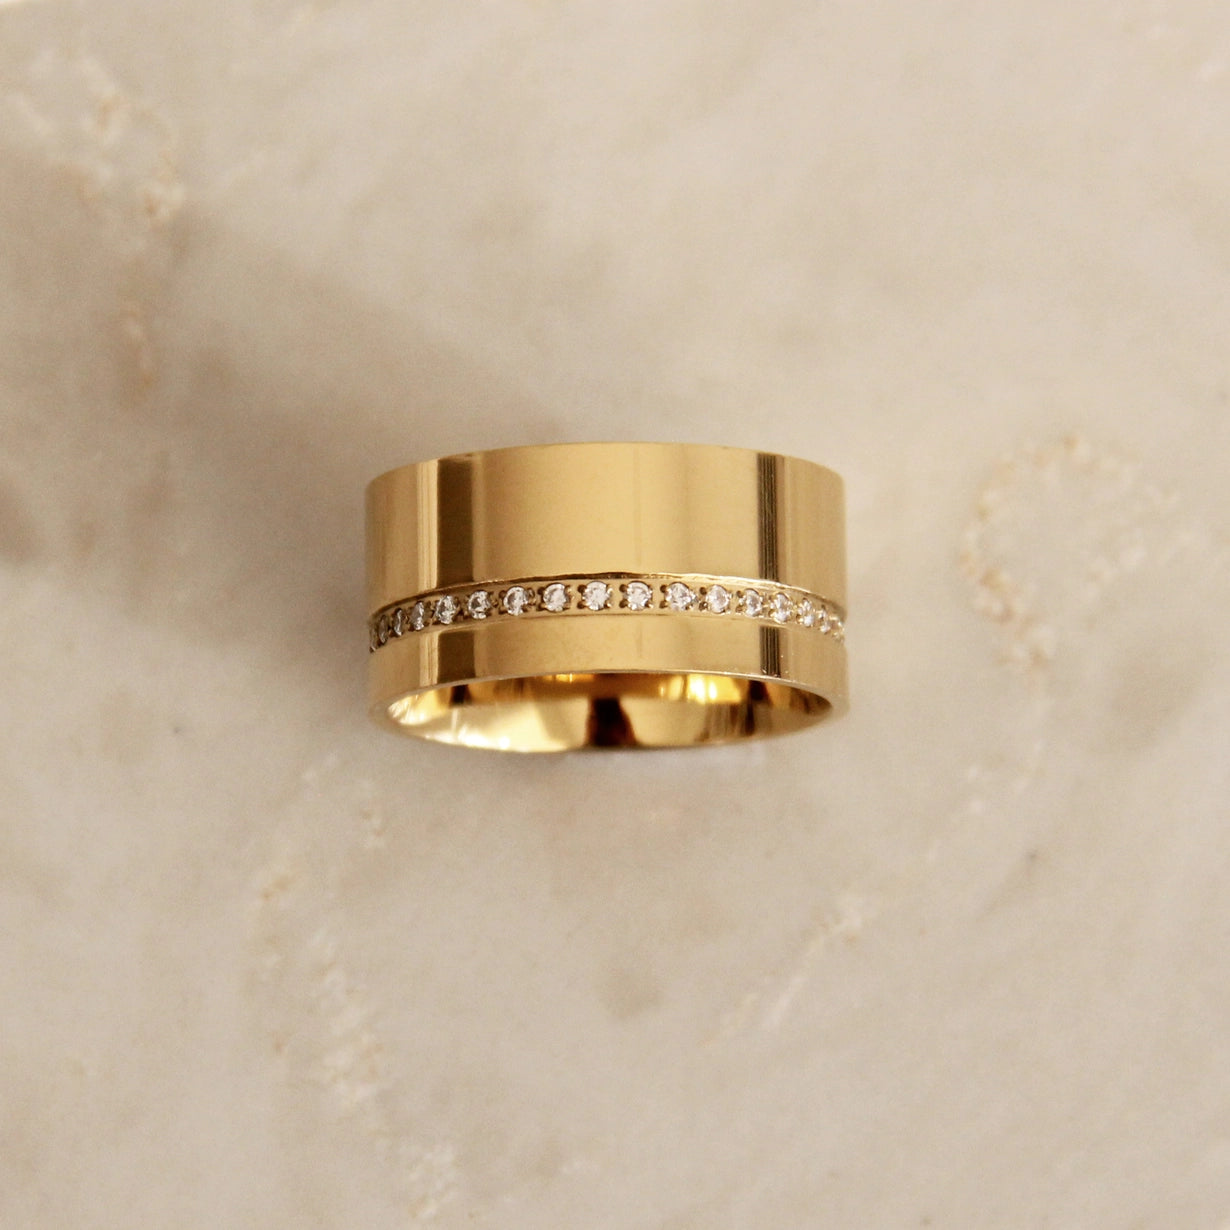 Cigar Band Ring by Maive